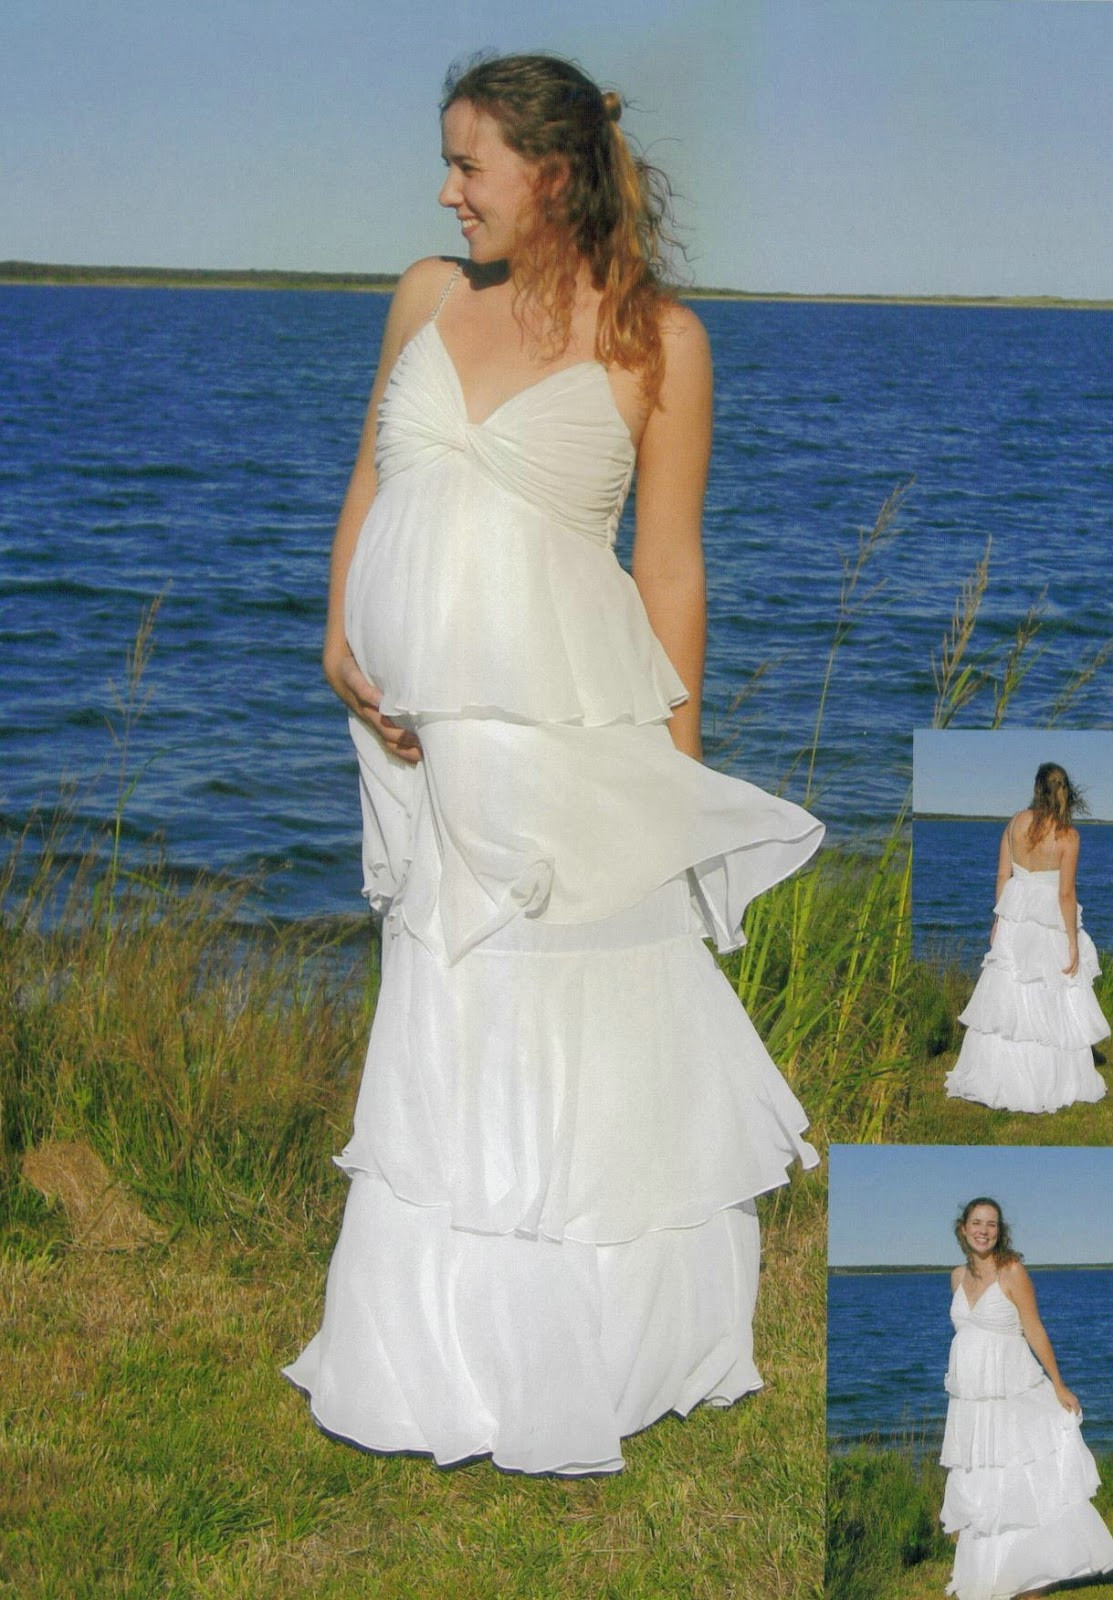 Maternity Wedding Gowns
 WhiteAzalea Maternity Dresses Are You Ready for a